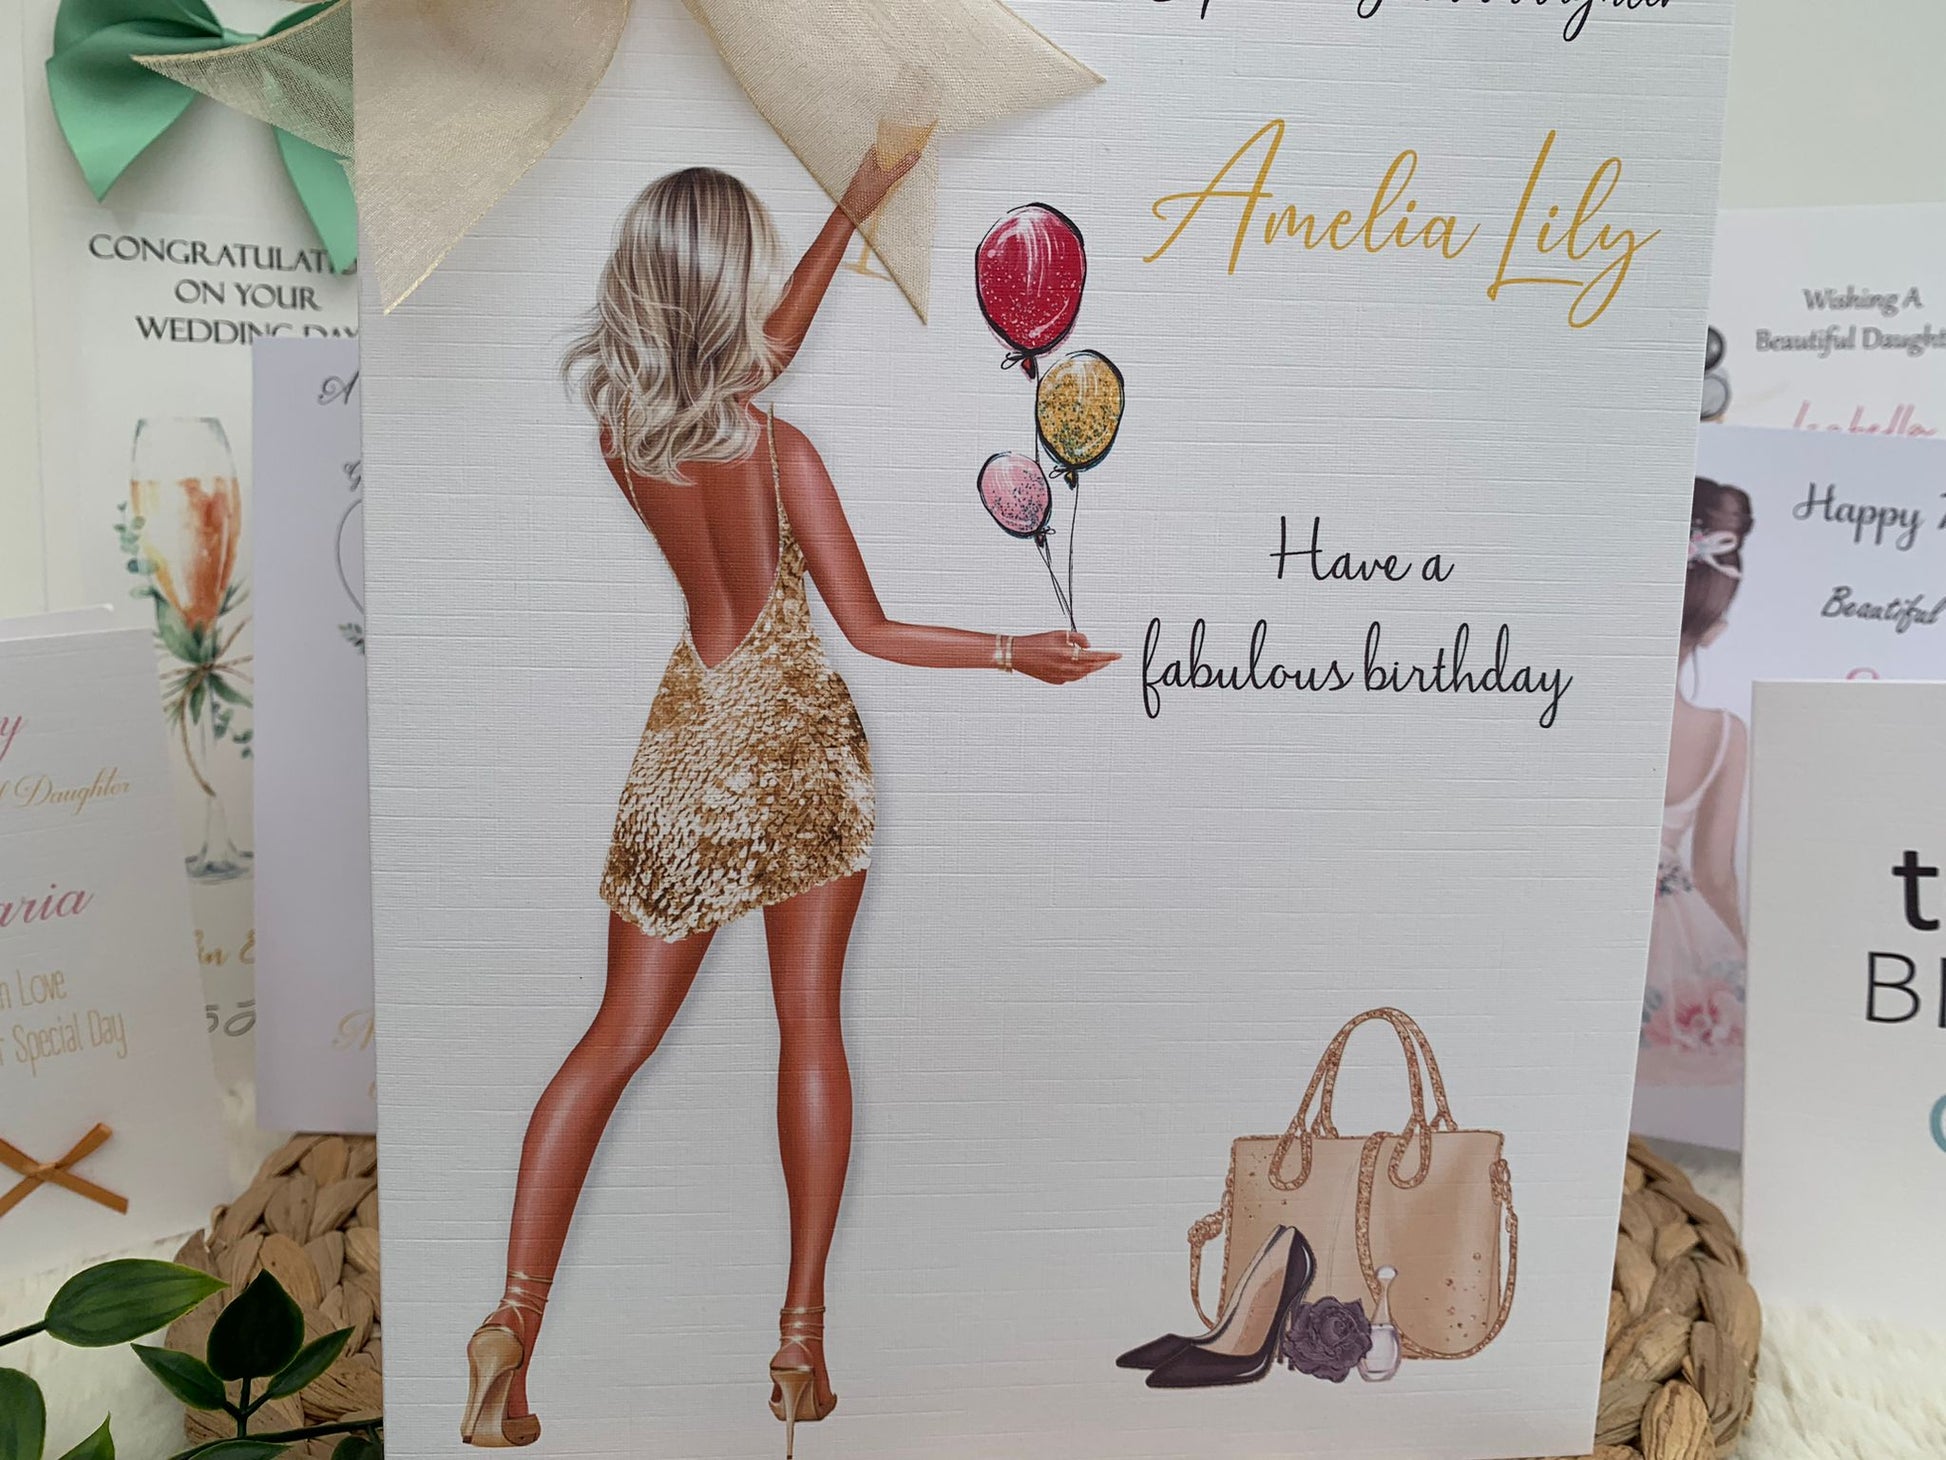 a birthday card with a picture of a woman holding balloons